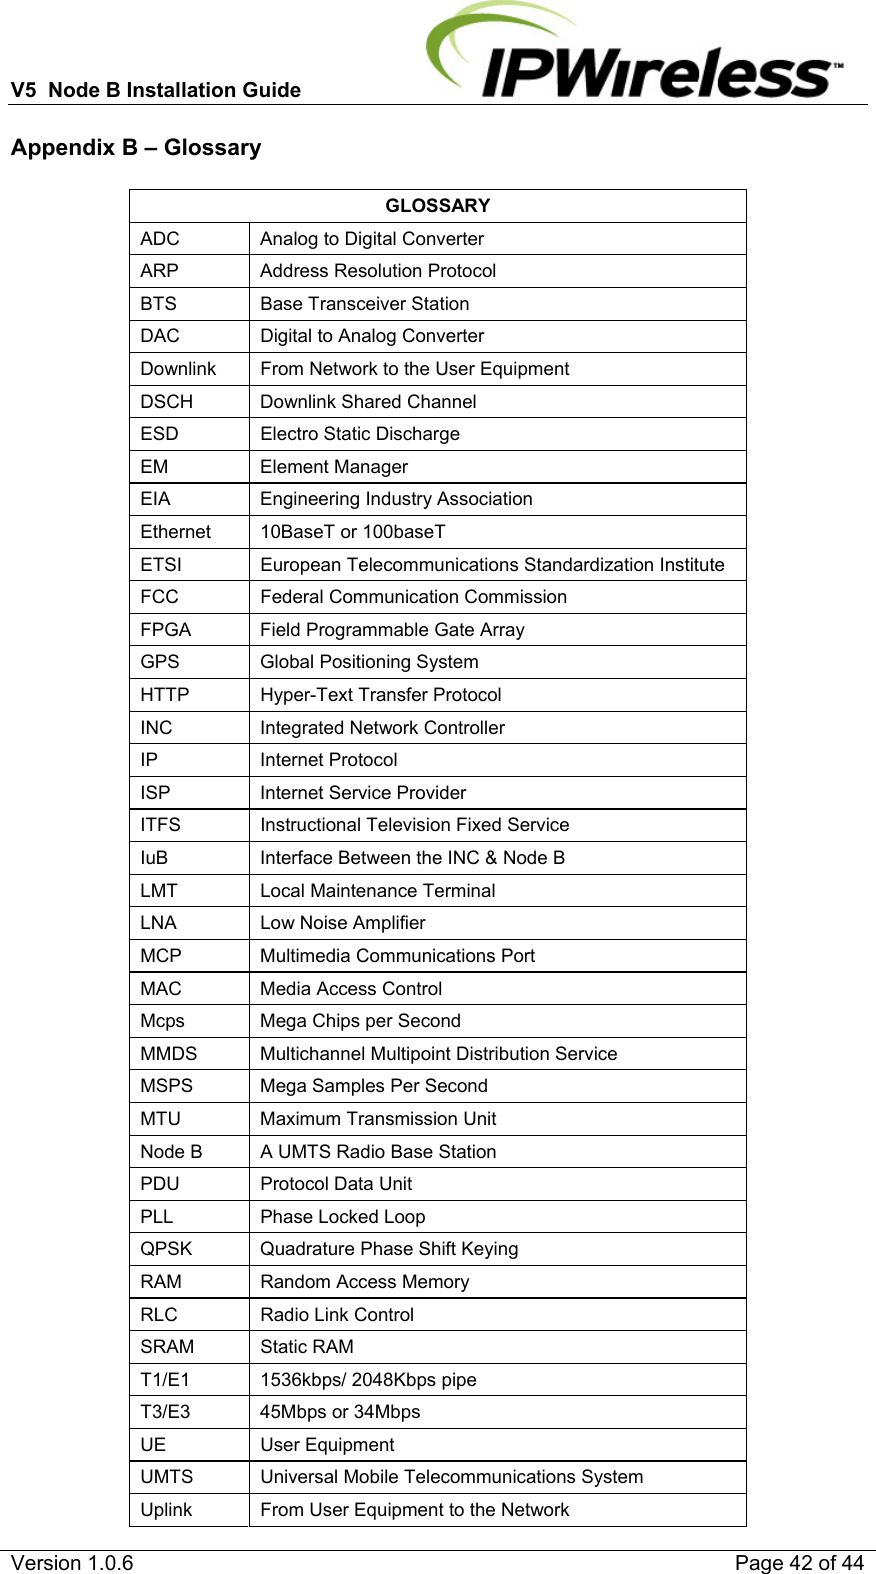 V5  Node B Installation Guide                           Version 1.0.6    Page 42 of 44 Appendix B – Glossary  GLOSSARY ADC   Analog to Digital Converter ARP   Address Resolution Protocol BTS   Base Transceiver Station DAC   Digital to Analog Converter Downlink   From Network to the User Equipment DSCH   Downlink Shared Channel ESD   Electro Static Discharge EM   Element Manager EIA   Engineering Industry Association Ethernet  10BaseT or 100baseT ETSI   European Telecommunications Standardization Institute FCC   Federal Communication Commission FPGA   Field Programmable Gate Array GPS   Global Positioning System HTTP    Hyper-Text Transfer Protocol INC   Integrated Network Controller IP   Internet Protocol ISP   Internet Service Provider ITFS   Instructional Television Fixed Service IuB   Interface Between the INC &amp; Node B LMT   Local Maintenance Terminal LNA   Low Noise Amplifier MCP   Multimedia Communications Port MAC   Media Access Control Mcps   Mega Chips per Second MMDS   Multichannel Multipoint Distribution Service MSPS   Mega Samples Per Second MTU   Maximum Transmission Unit Node B   A UMTS Radio Base Station PDU   Protocol Data Unit PLL   Phase Locked Loop QPSK   Quadrature Phase Shift Keying RAM   Random Access Memory RLC   Radio Link Control SRAM   Static RAM T1/E1   1536kbps/ 2048Kbps pipe T3/E3  45Mbps or 34Mbps UE   User Equipment UMTS   Universal Mobile Telecommunications System Uplink   From User Equipment to the Network 